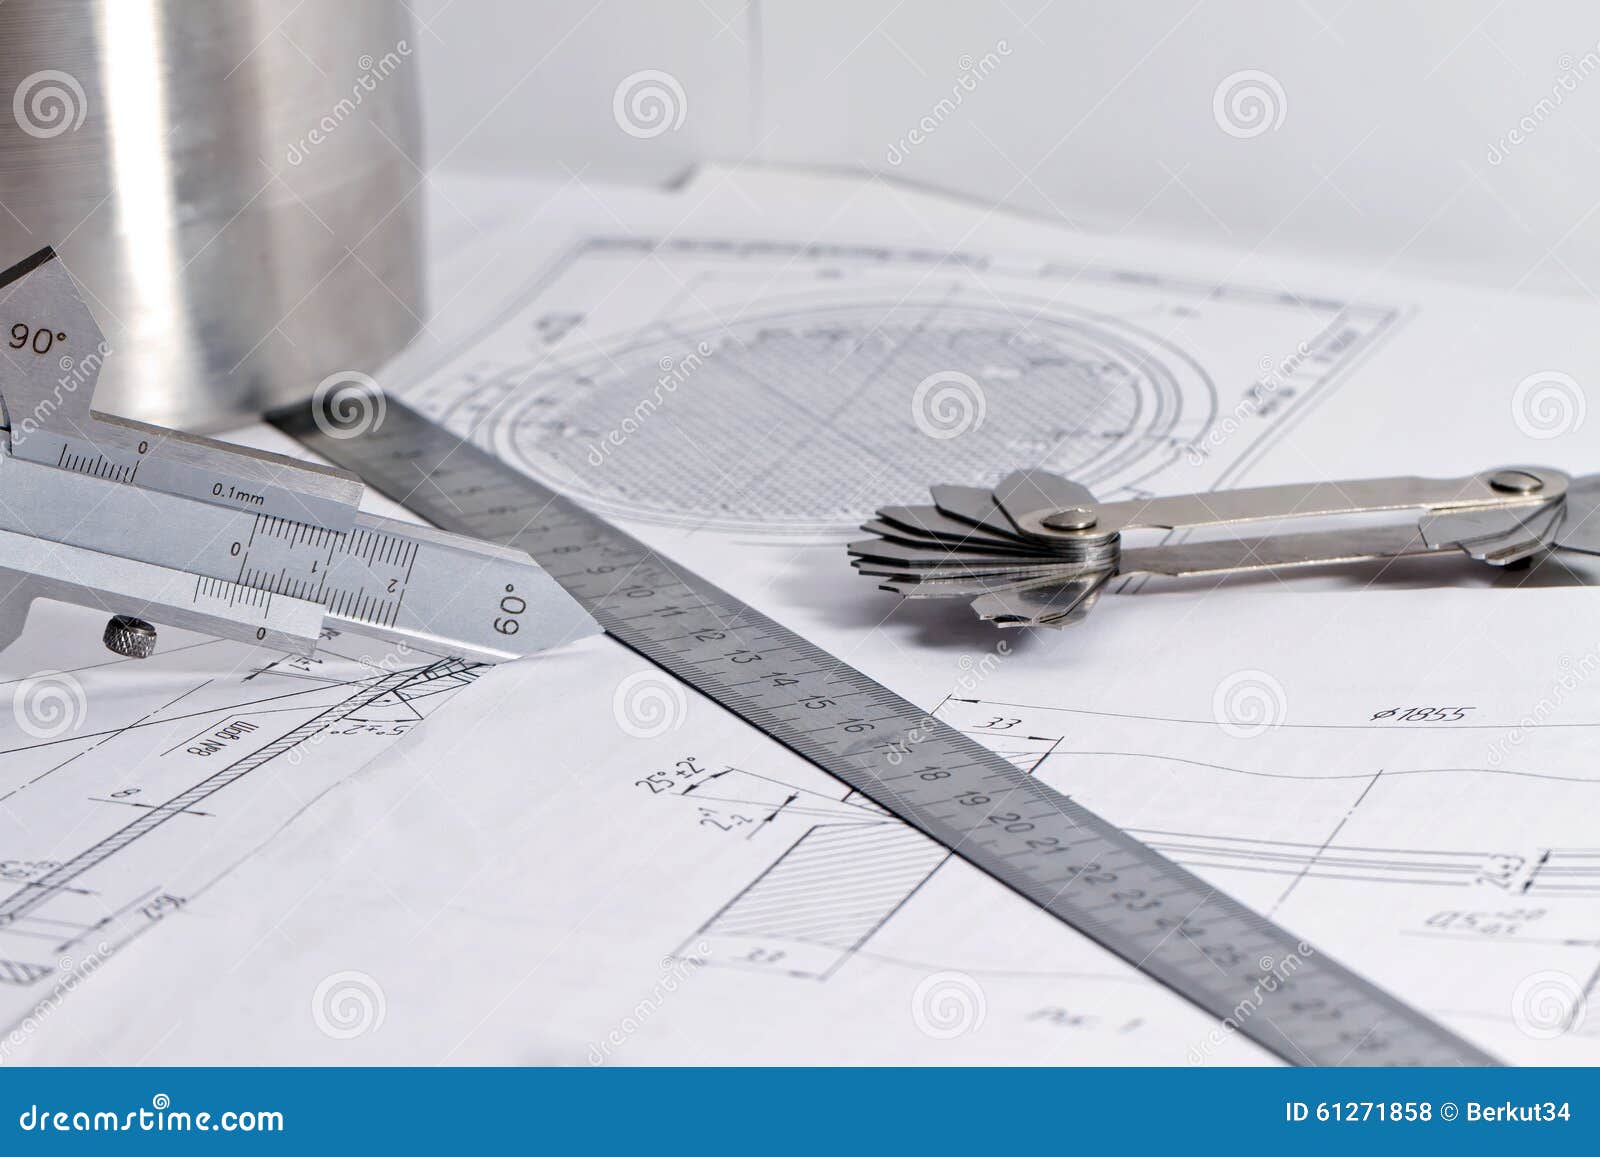 https://thumbs.dreamstime.com/z/templates-visual-measurement-control-drawing-pipe-measuring-bevel-edge-preparation-welded-joints-61271858.jpg